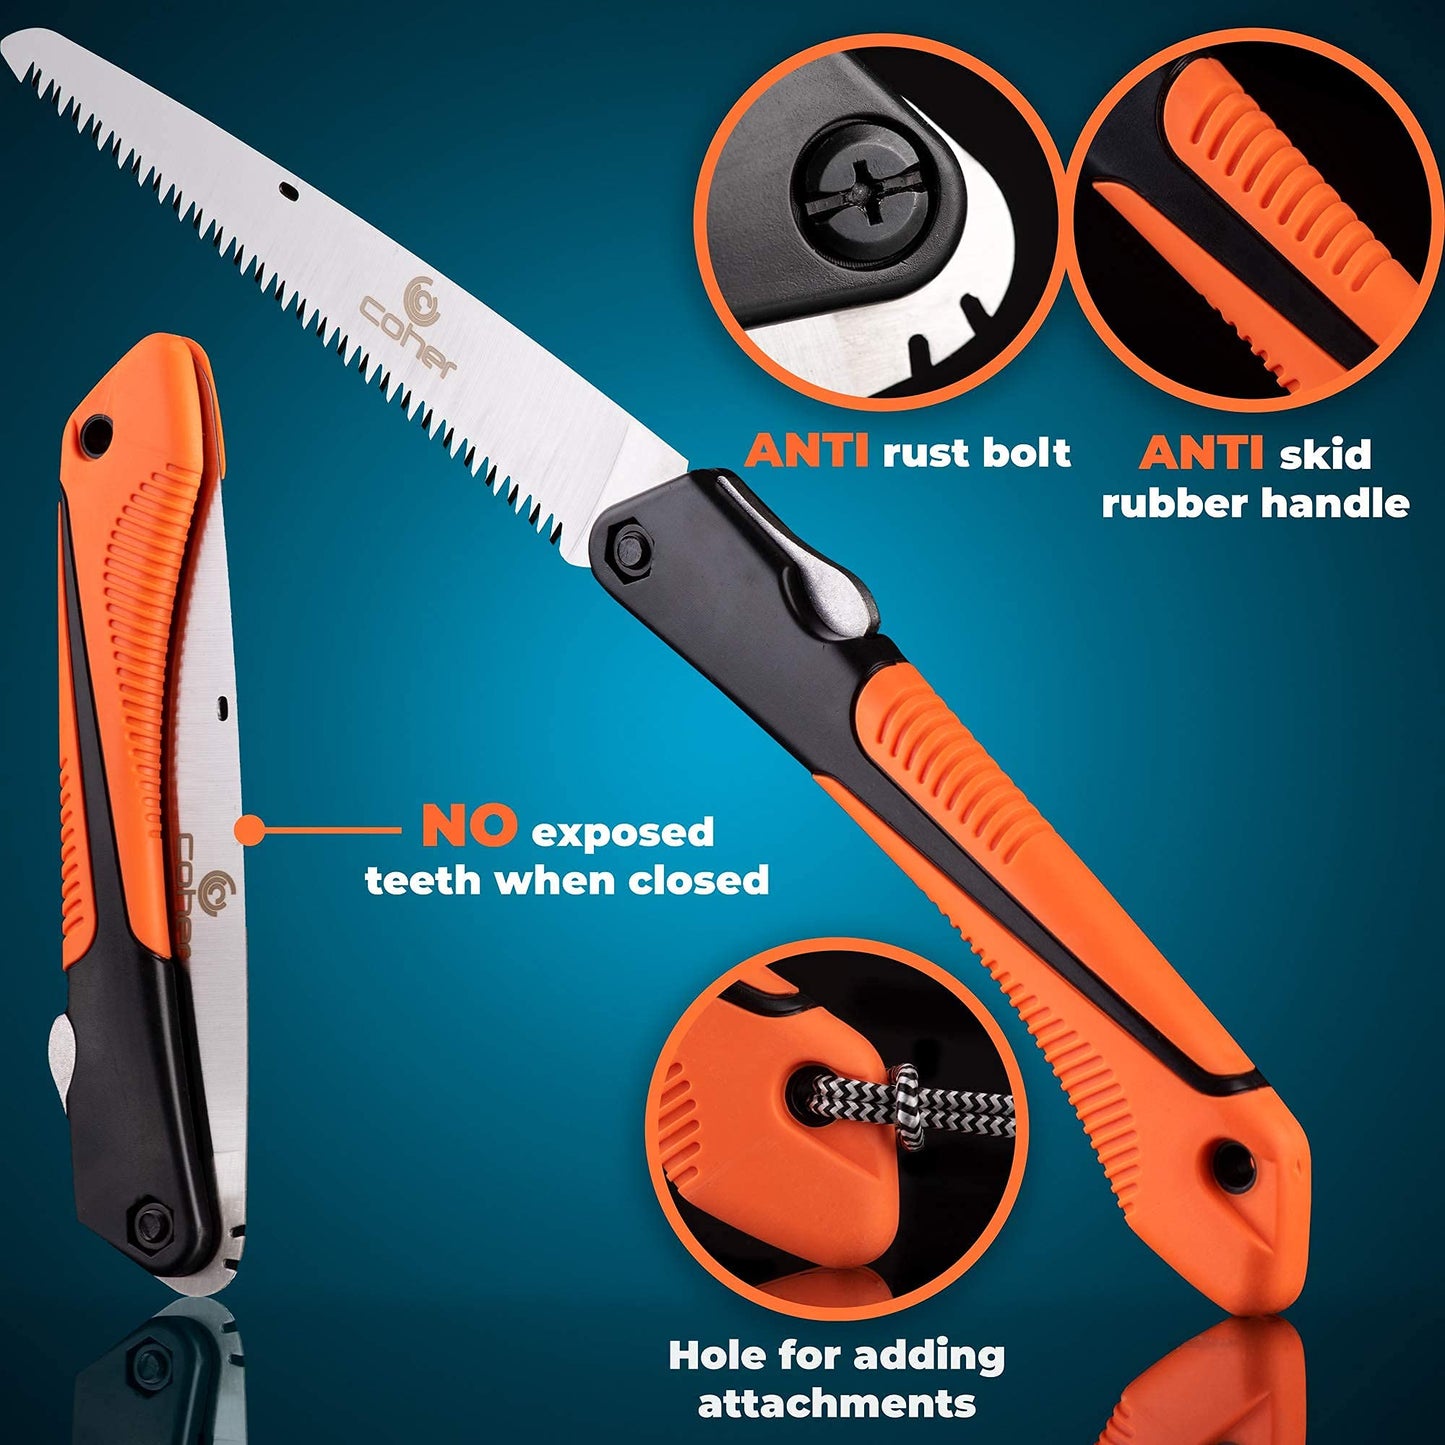 Folding Saw, 8 Inch Rugged Blade Hand Saw, Best for Camping, Gardening, Hunting | Cutting Wood, PVC, Bone, Pruning Saw with Ergonomic Non-Slip Handle Design